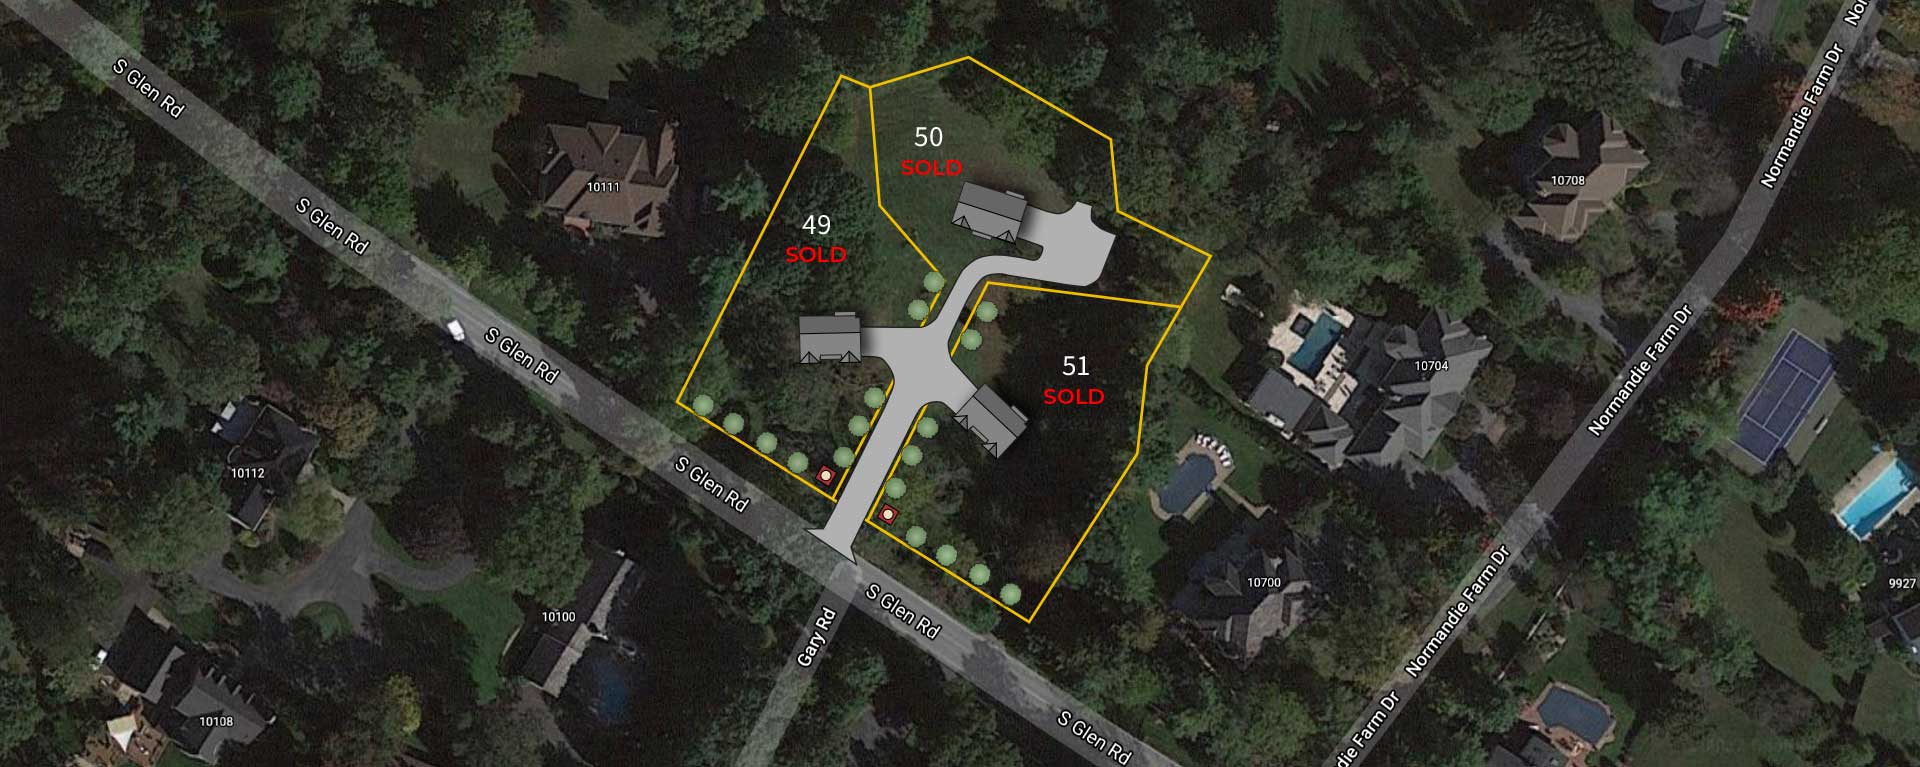 An aerial satellite image showing a three lot subdivision lot outline superimposed with proposed house placement, all three lots are marked SOLD